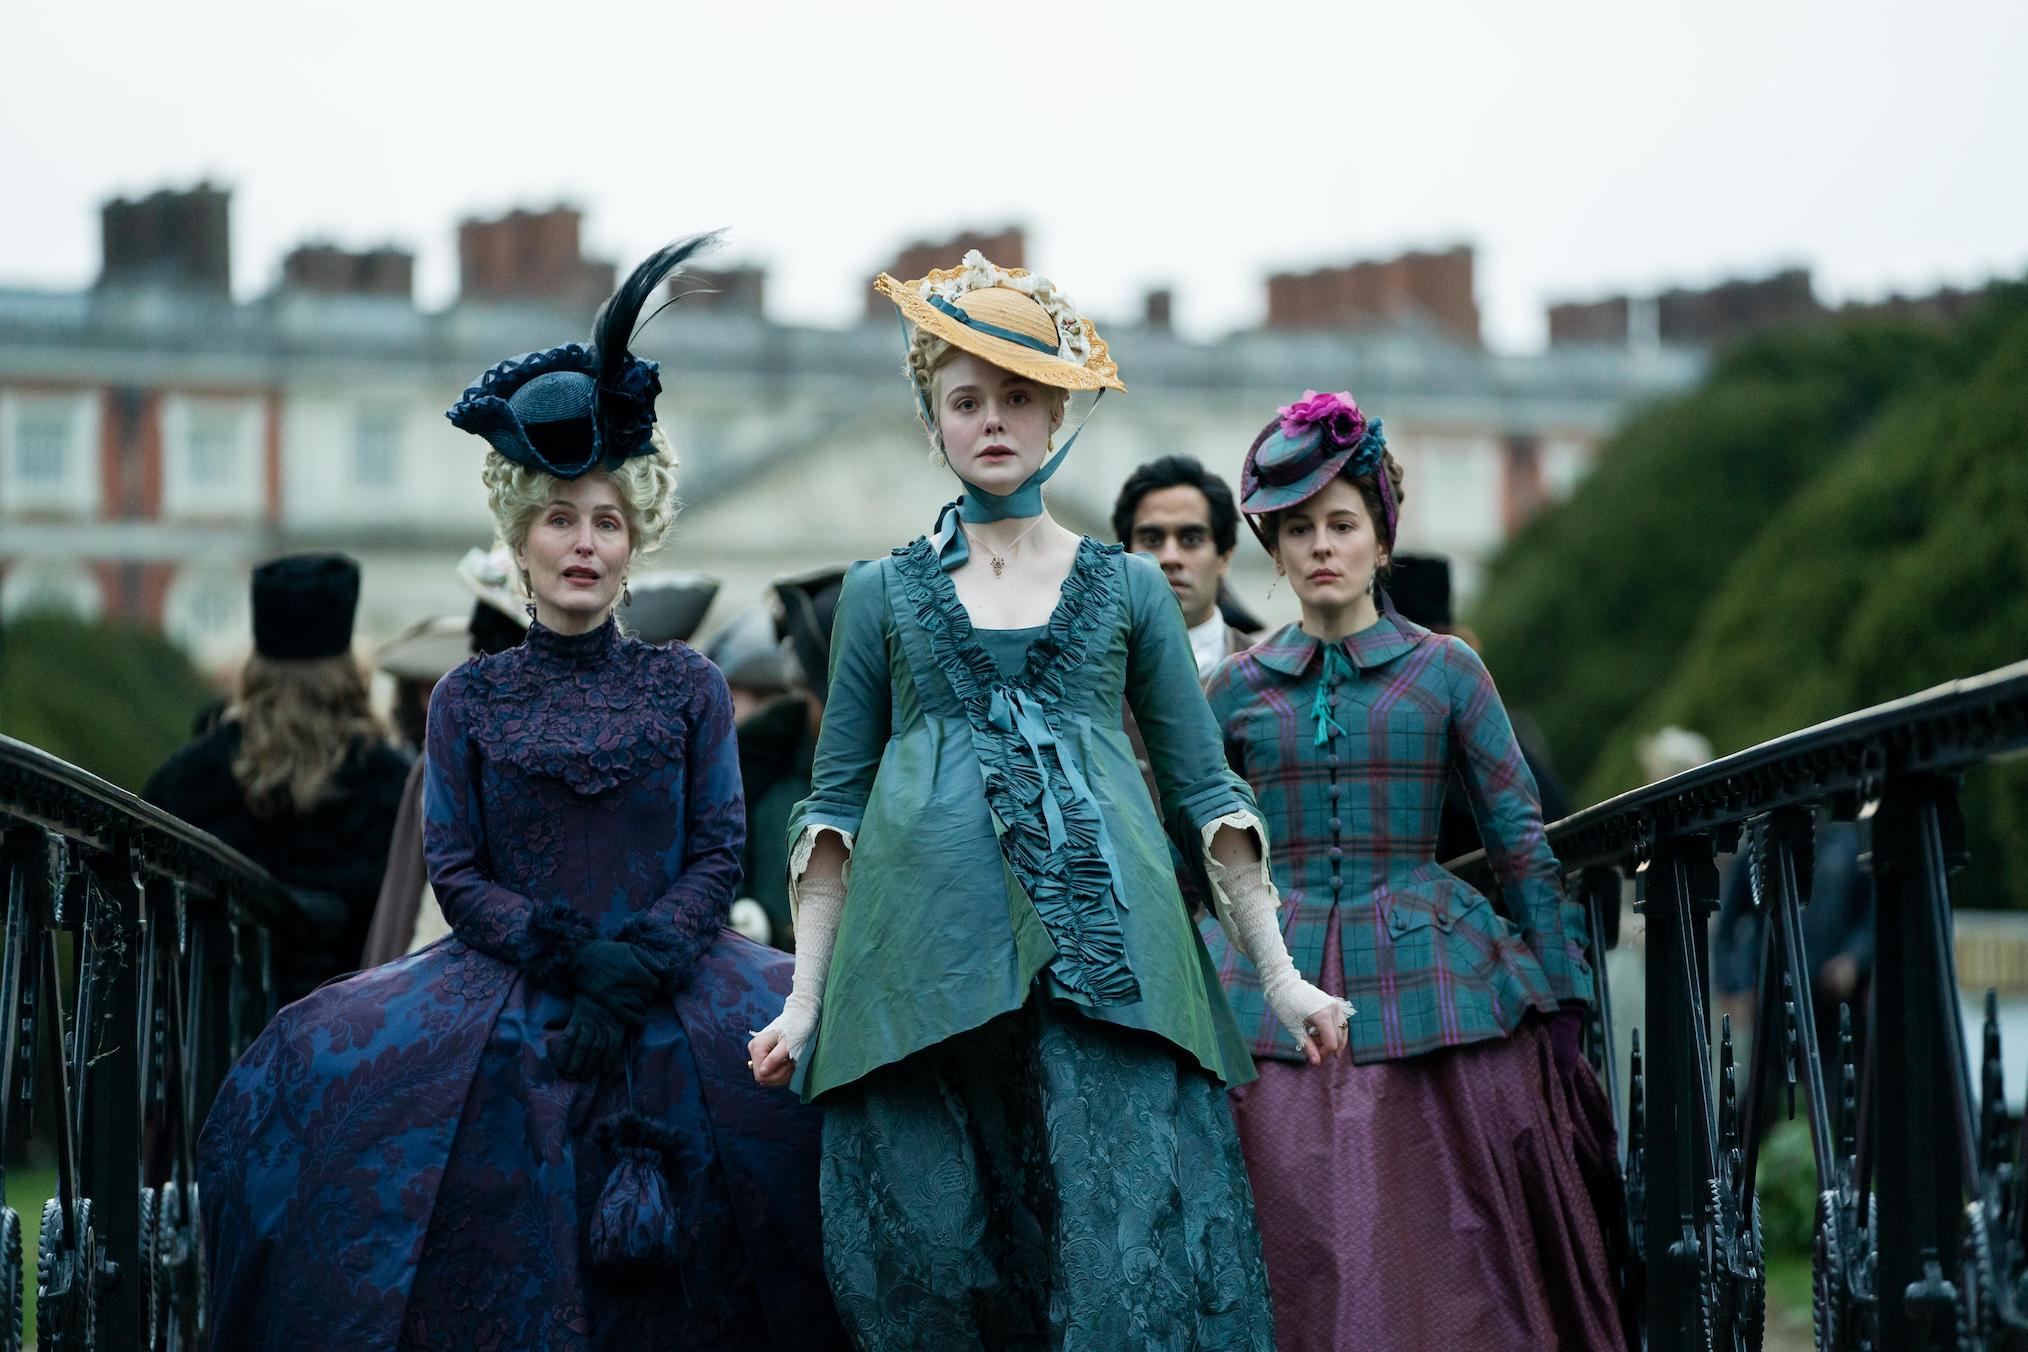 Gillian Anderson, Elle Fanning, and Phoebe Fox Phoebe Fox as Marial and Elle Fanning as Catherine in 'The Great' Season 2 on Hulu